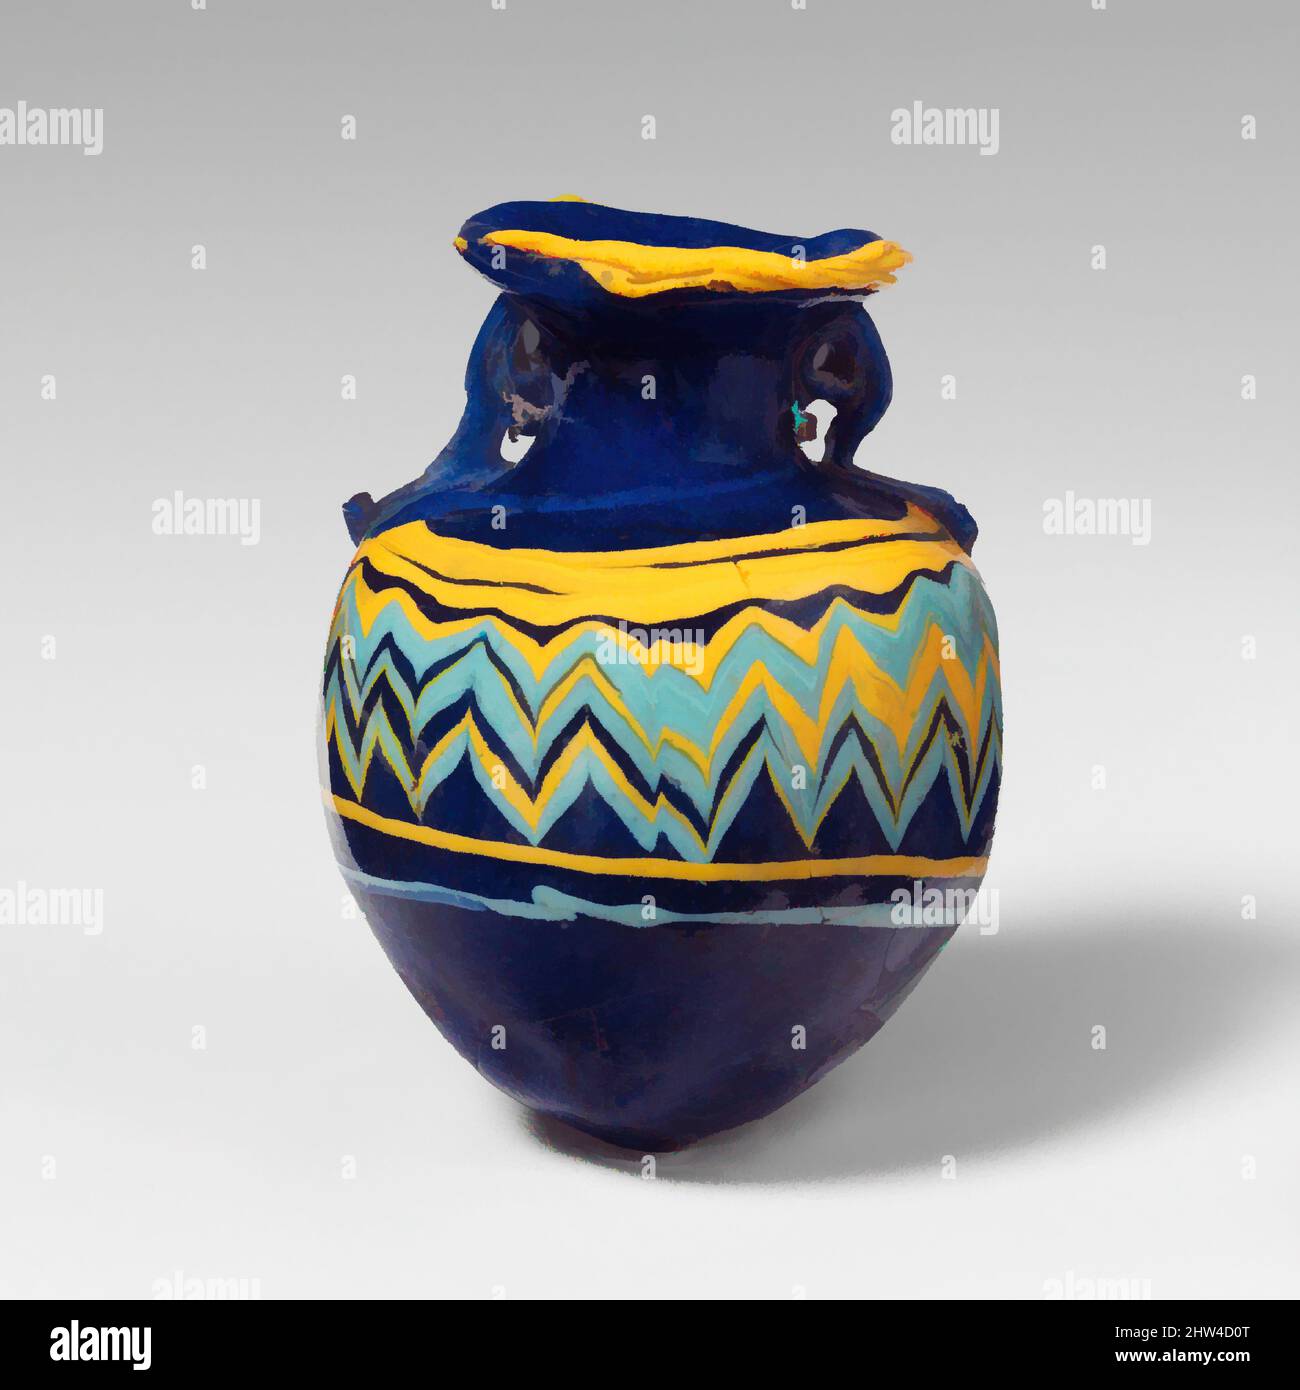 Art inspired by Glass aryballos (perfume bottle), Classical, late 6th–5th century B.C., Greek, Eastern Mediterranean, Glass; core-formed, Group I, H.: 2 13/16 in. (7.1 cm), Glass, Translucent cobalt blue, with same color handles; trails in opaque yellow and opaque turquoise blue, Classic works modernized by Artotop with a splash of modernity. Shapes, color and value, eye-catching visual impact on art. Emotions through freedom of artworks in a contemporary way. A timeless message pursuing a wildly creative new direction. Artists turning to the digital medium and creating the Artotop NFT Stock Photo